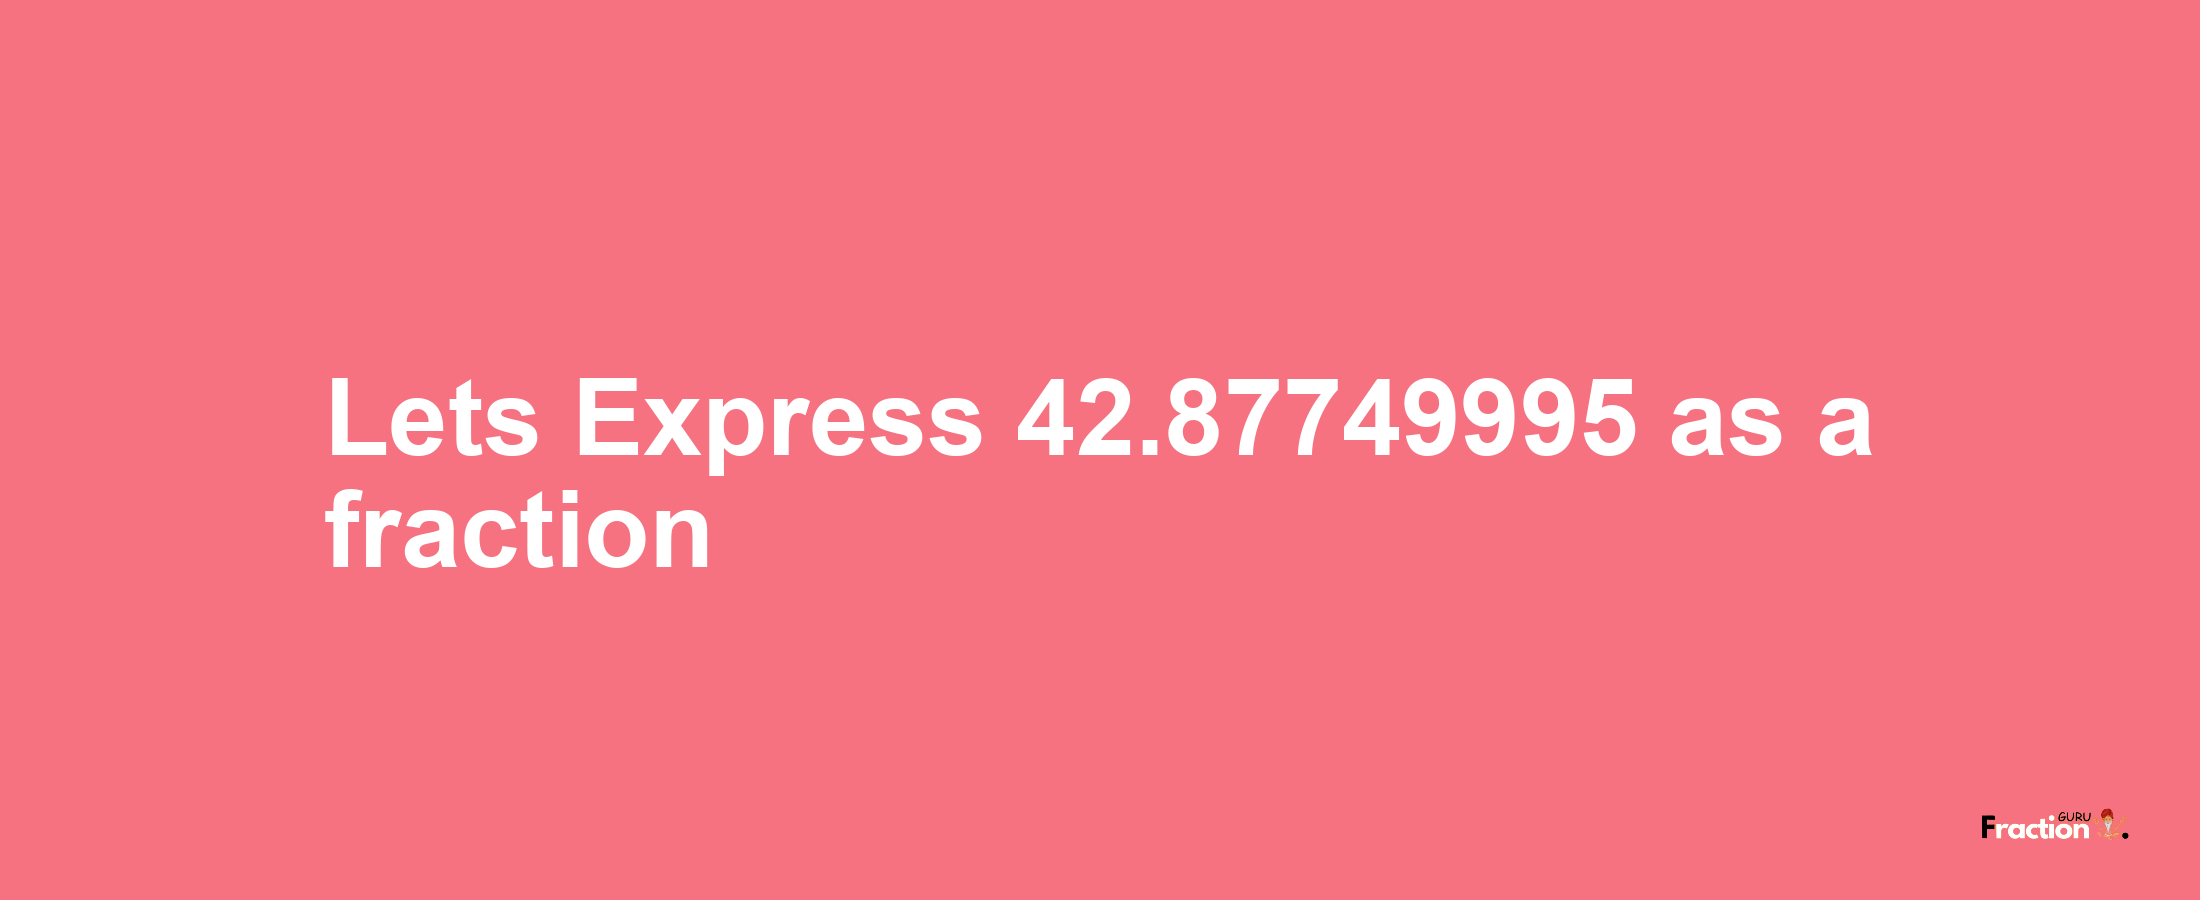 Lets Express 42.87749995 as afraction